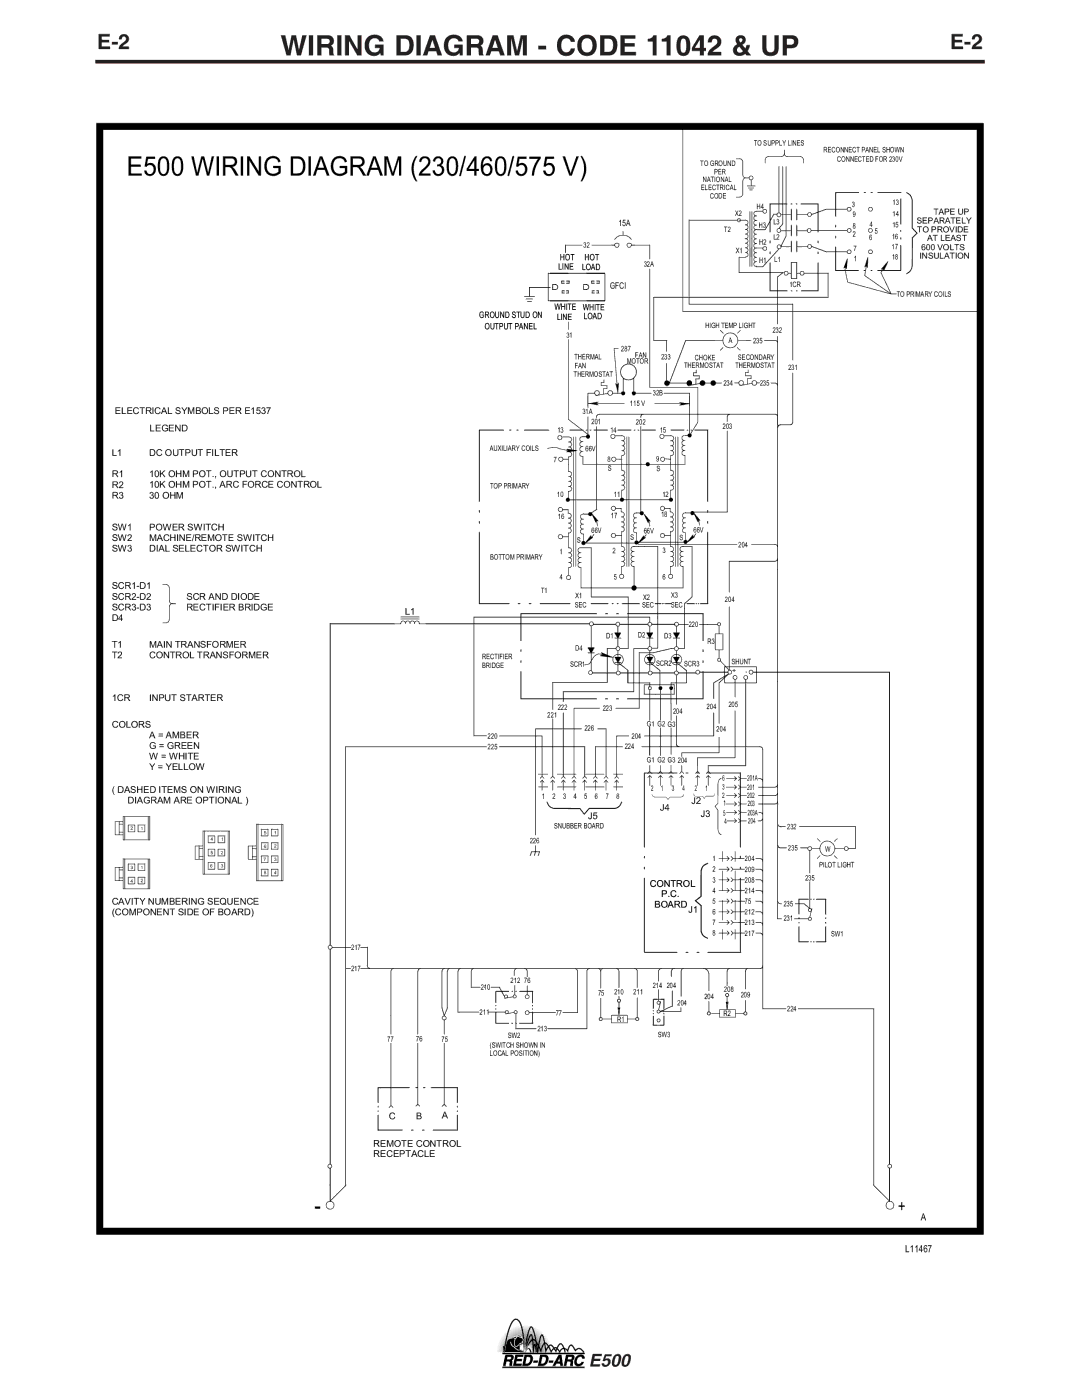 Lincoln Electric specifications Wiring Diagram Code 11042 & UP, E500 Wiring Diagram 230/460/575 